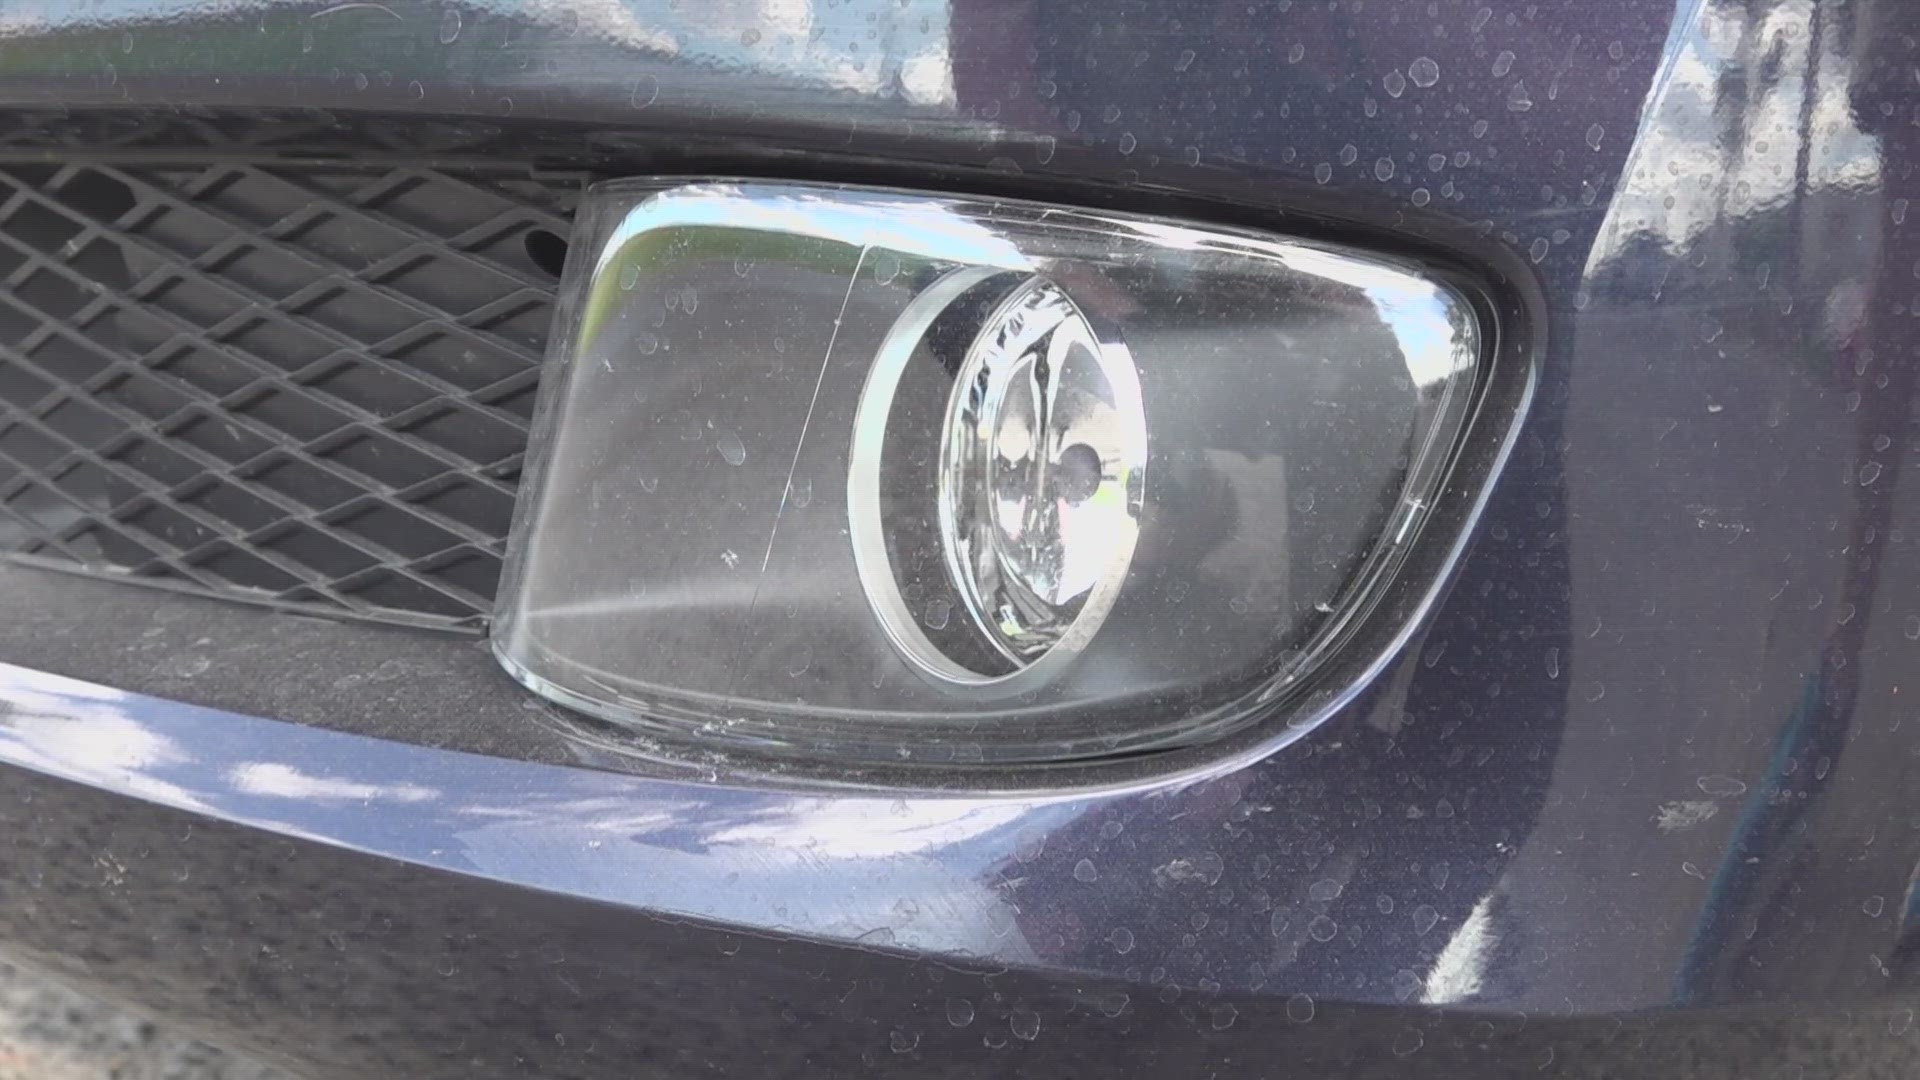 Does your car have fog lights? It's worth a double-check